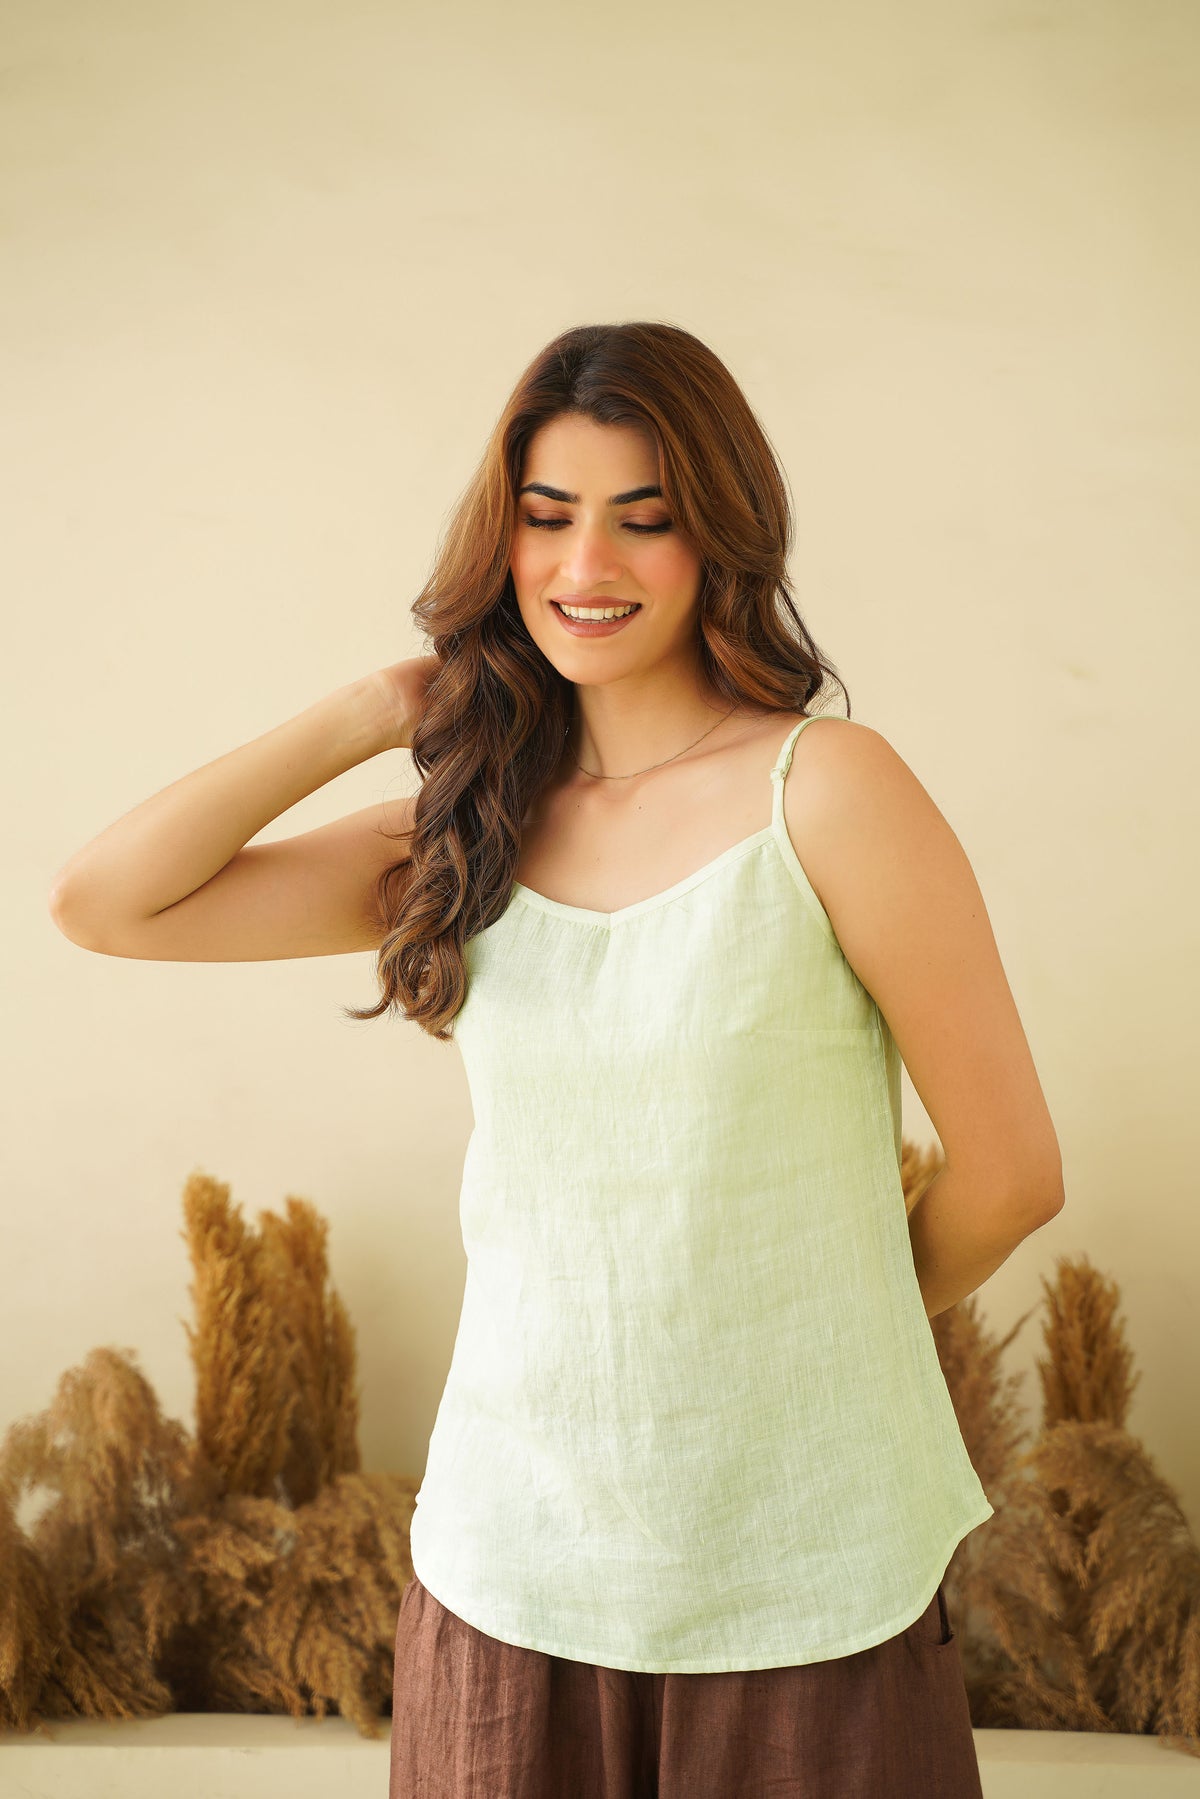 100% Pure Linen Tank Top Cami with Adjustable Straps | Sleeveless Washed Linen Blouse